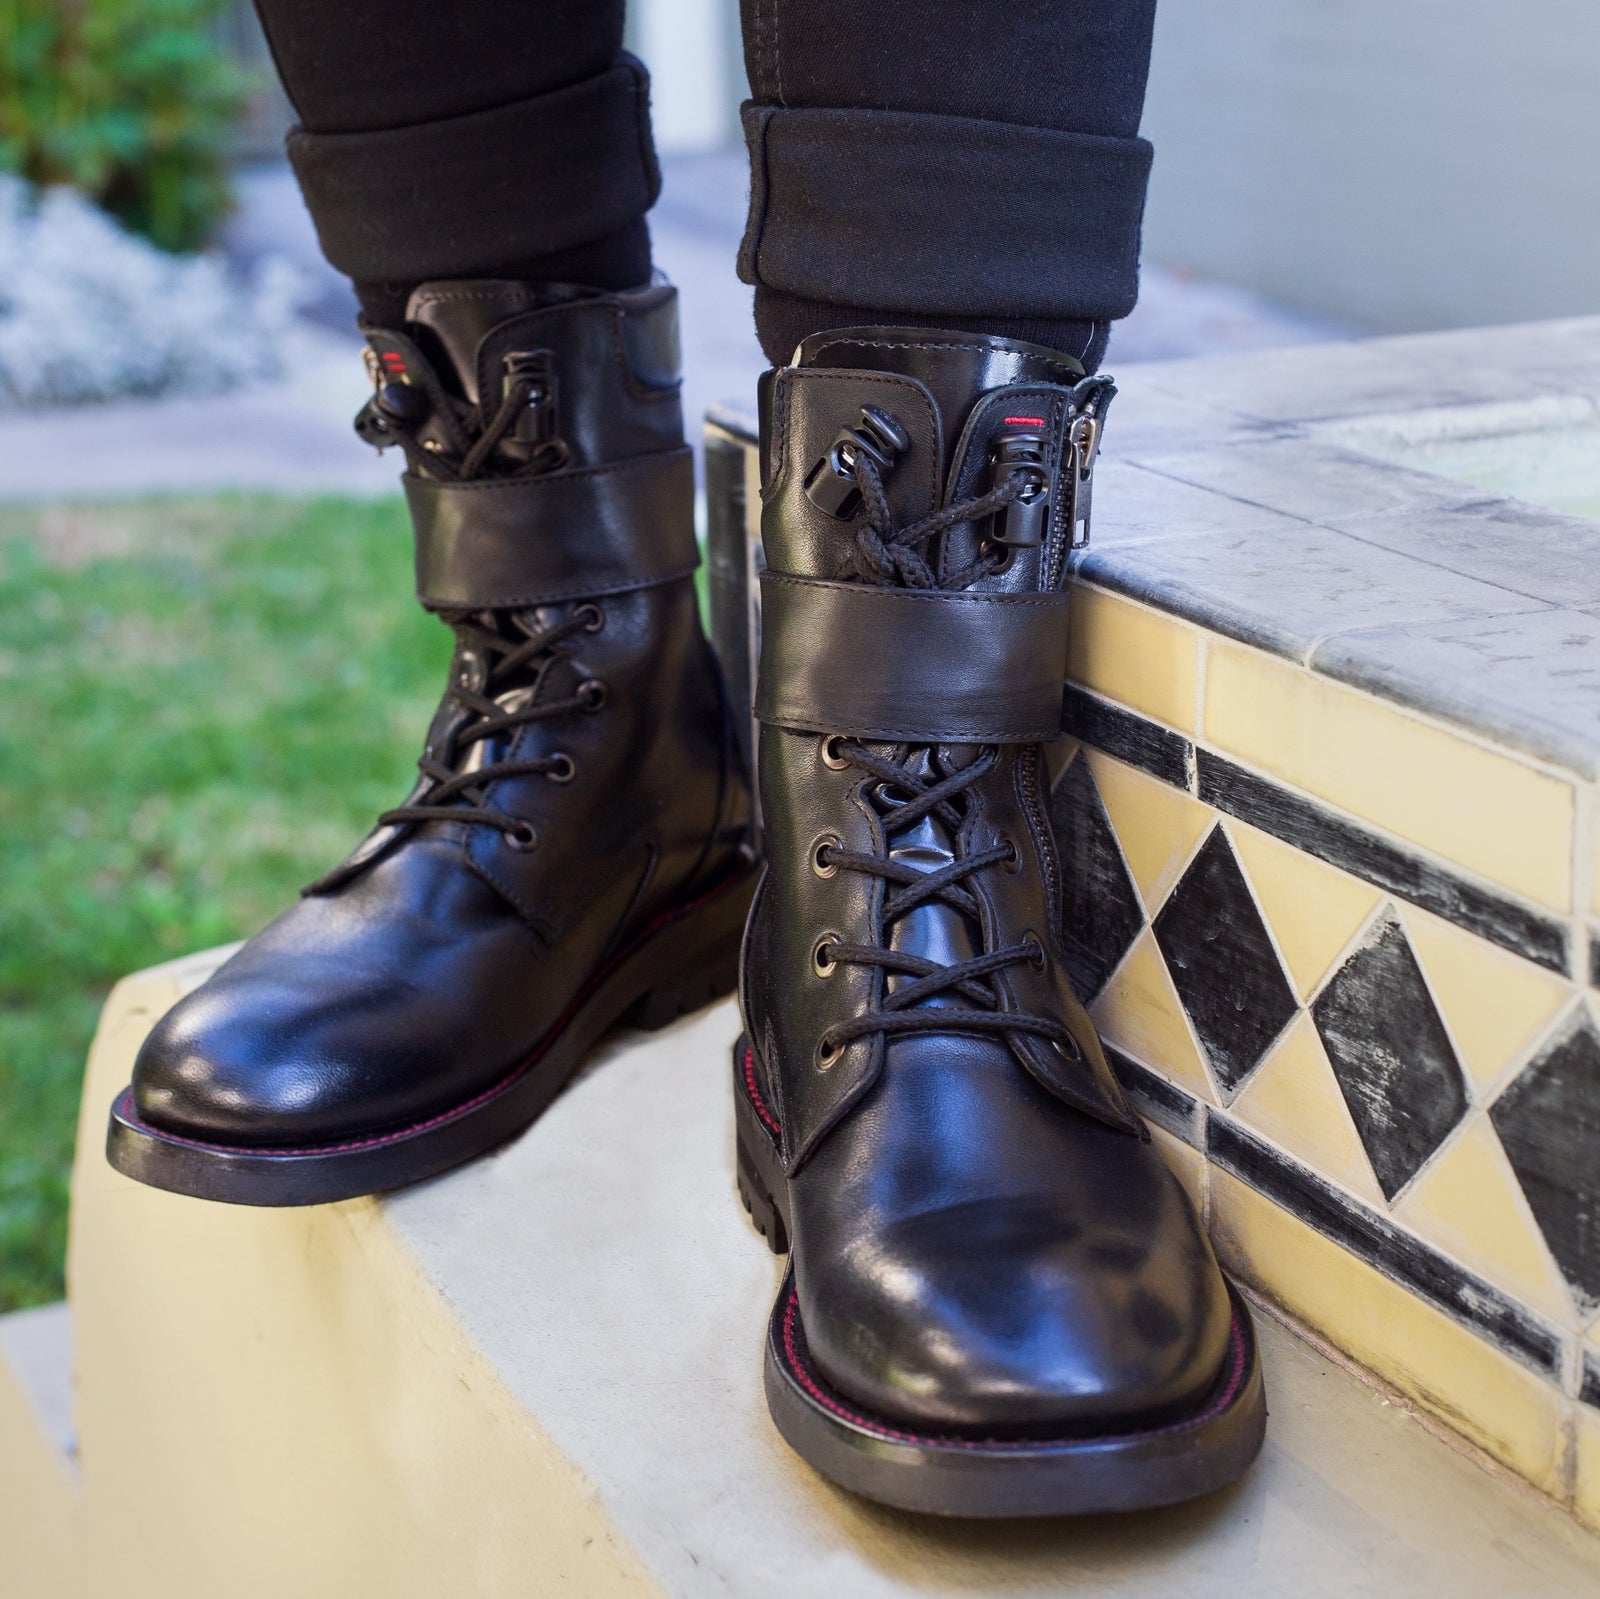 NiK Kacy Combat H8 Boots for all genders and expressions